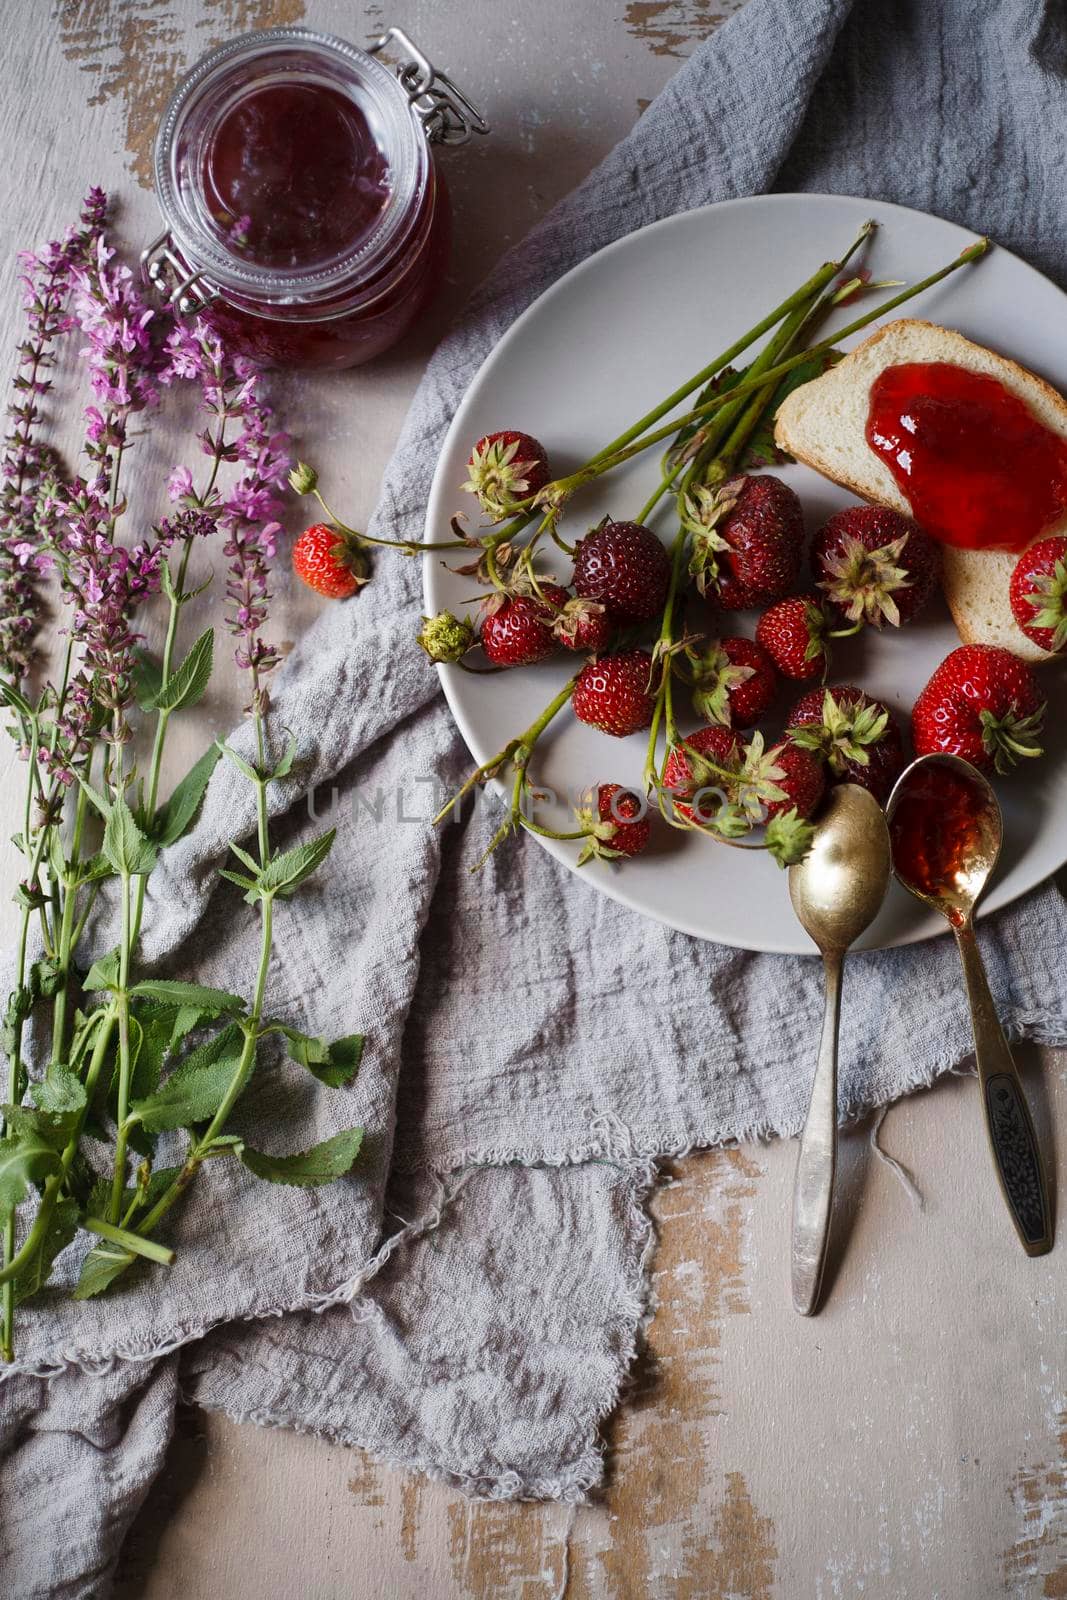 Summer breakfast concept with srawberry jam with bread and fresh harvested berries on wooden rustic table with pink flowers, top view, flat lay, selective focus.